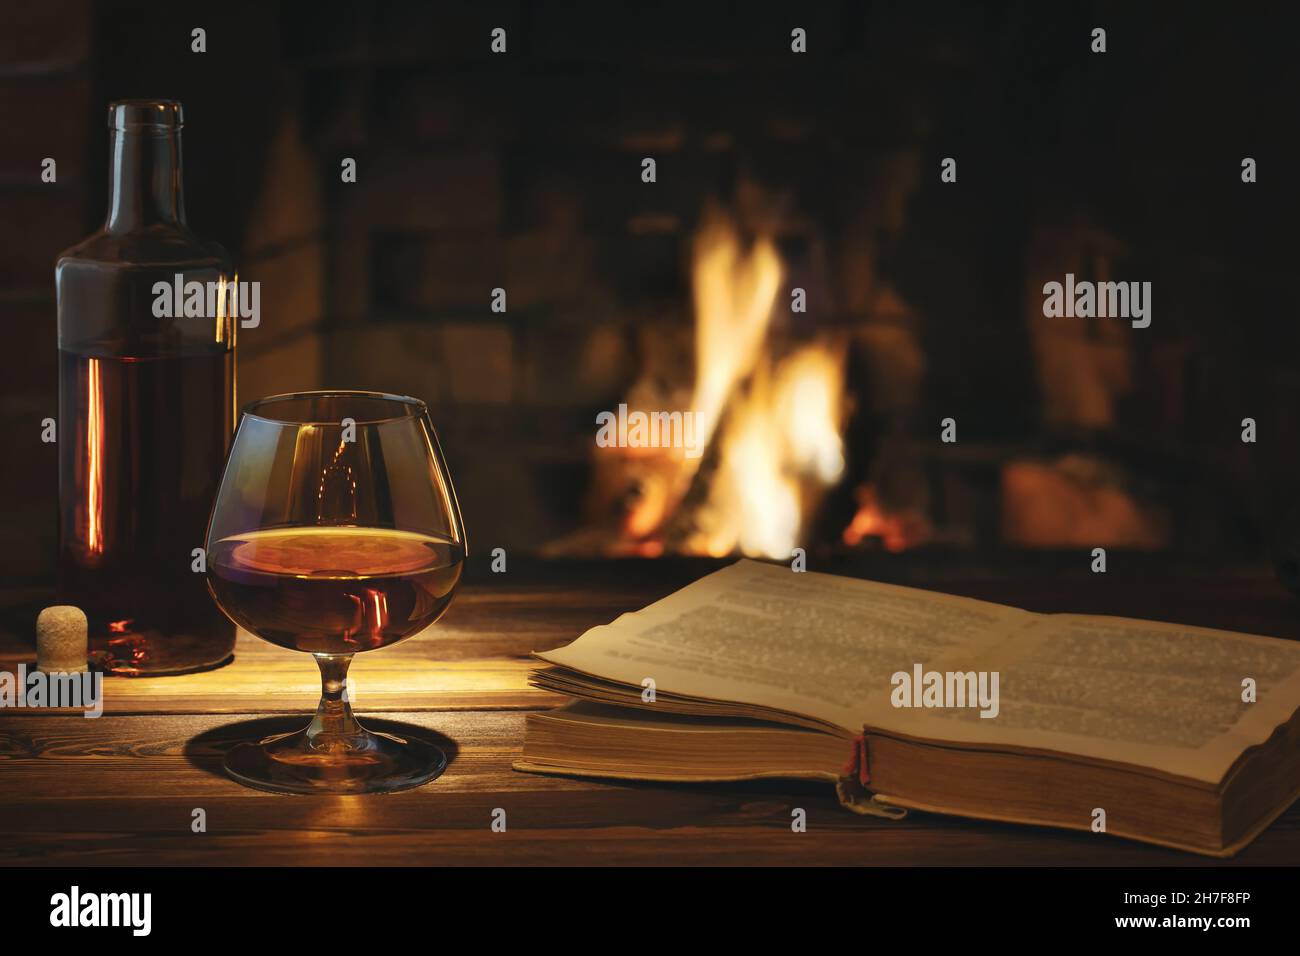 Glass of cognac, a bottle and an open old book on the table near the burning fireplace. Rest and relaxation concept Stock Photo